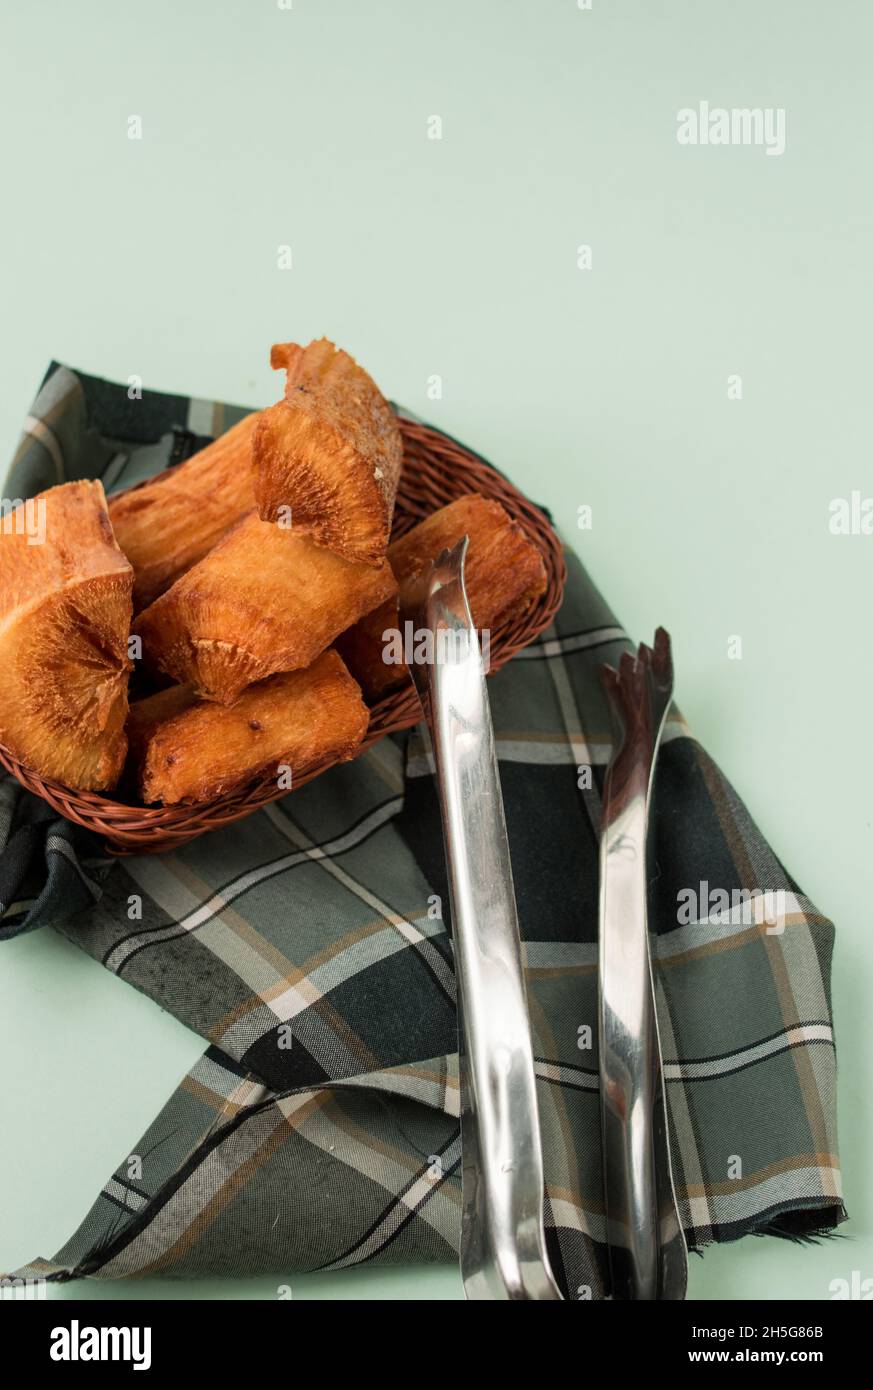 Fried yucca in a basket on a plaid piece of cloth on a green surface Stock Photo